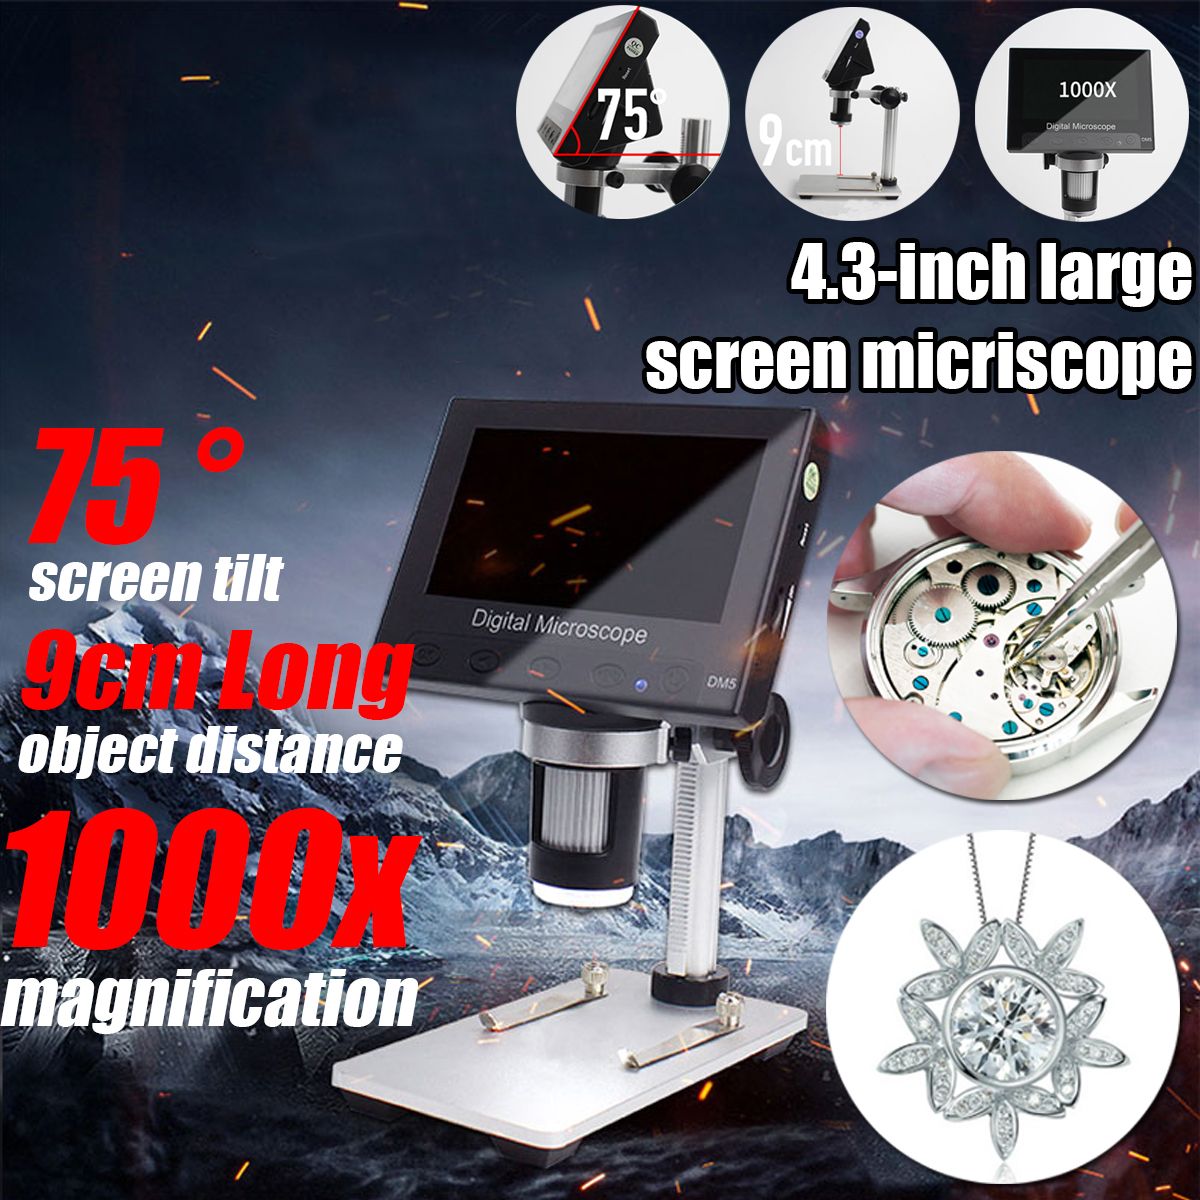 DM5-1000X-43-inch-1080P-Digital-USB-Microscope-Magnifier-Camera-With-8LED-Lights-and-Stand-1616992